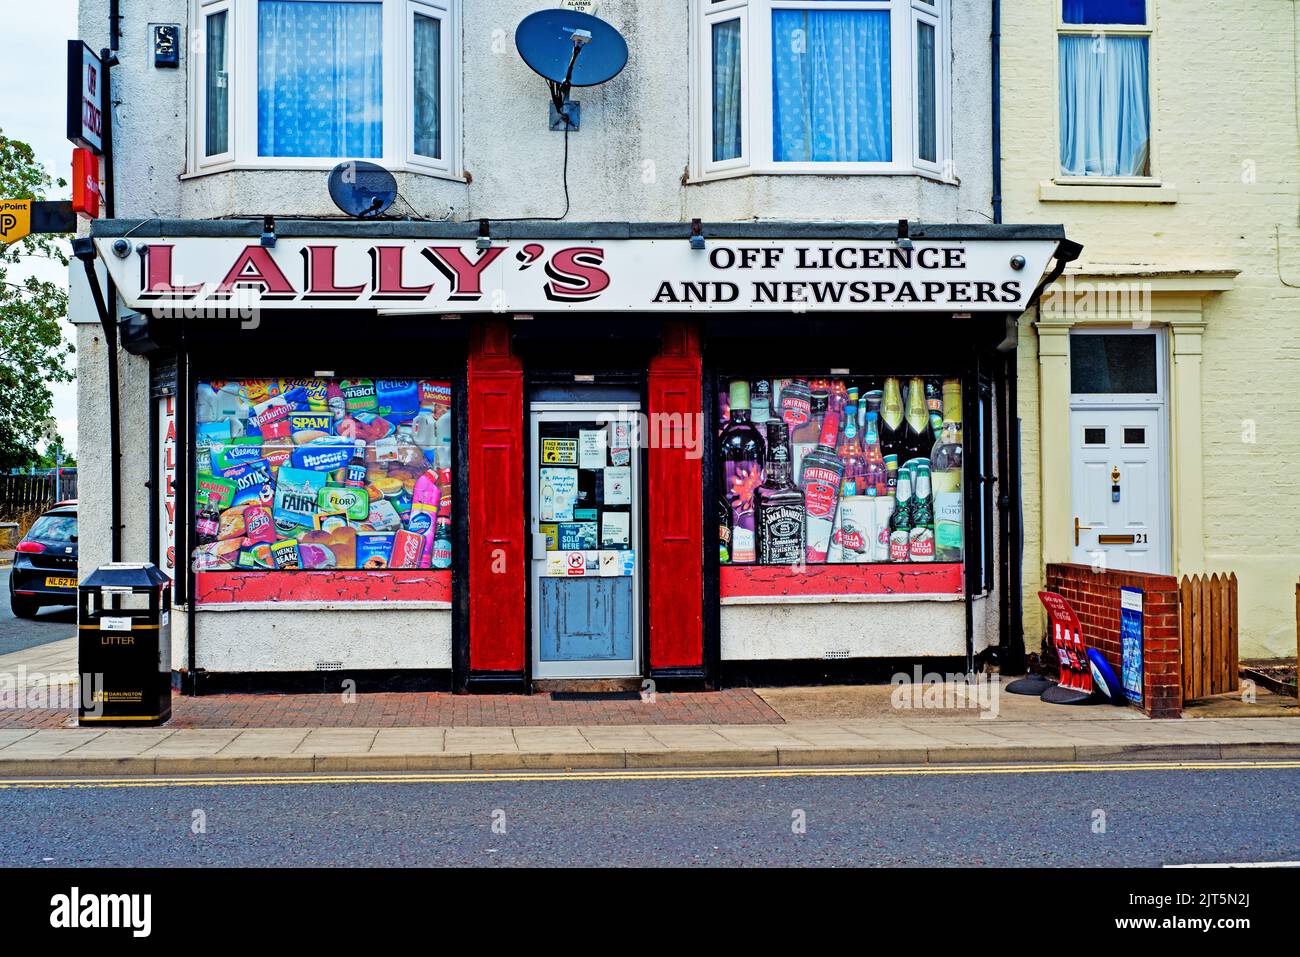 Lallys Off License and Newspapers, St. Johns Terrace, Darlington, England Stockfoto